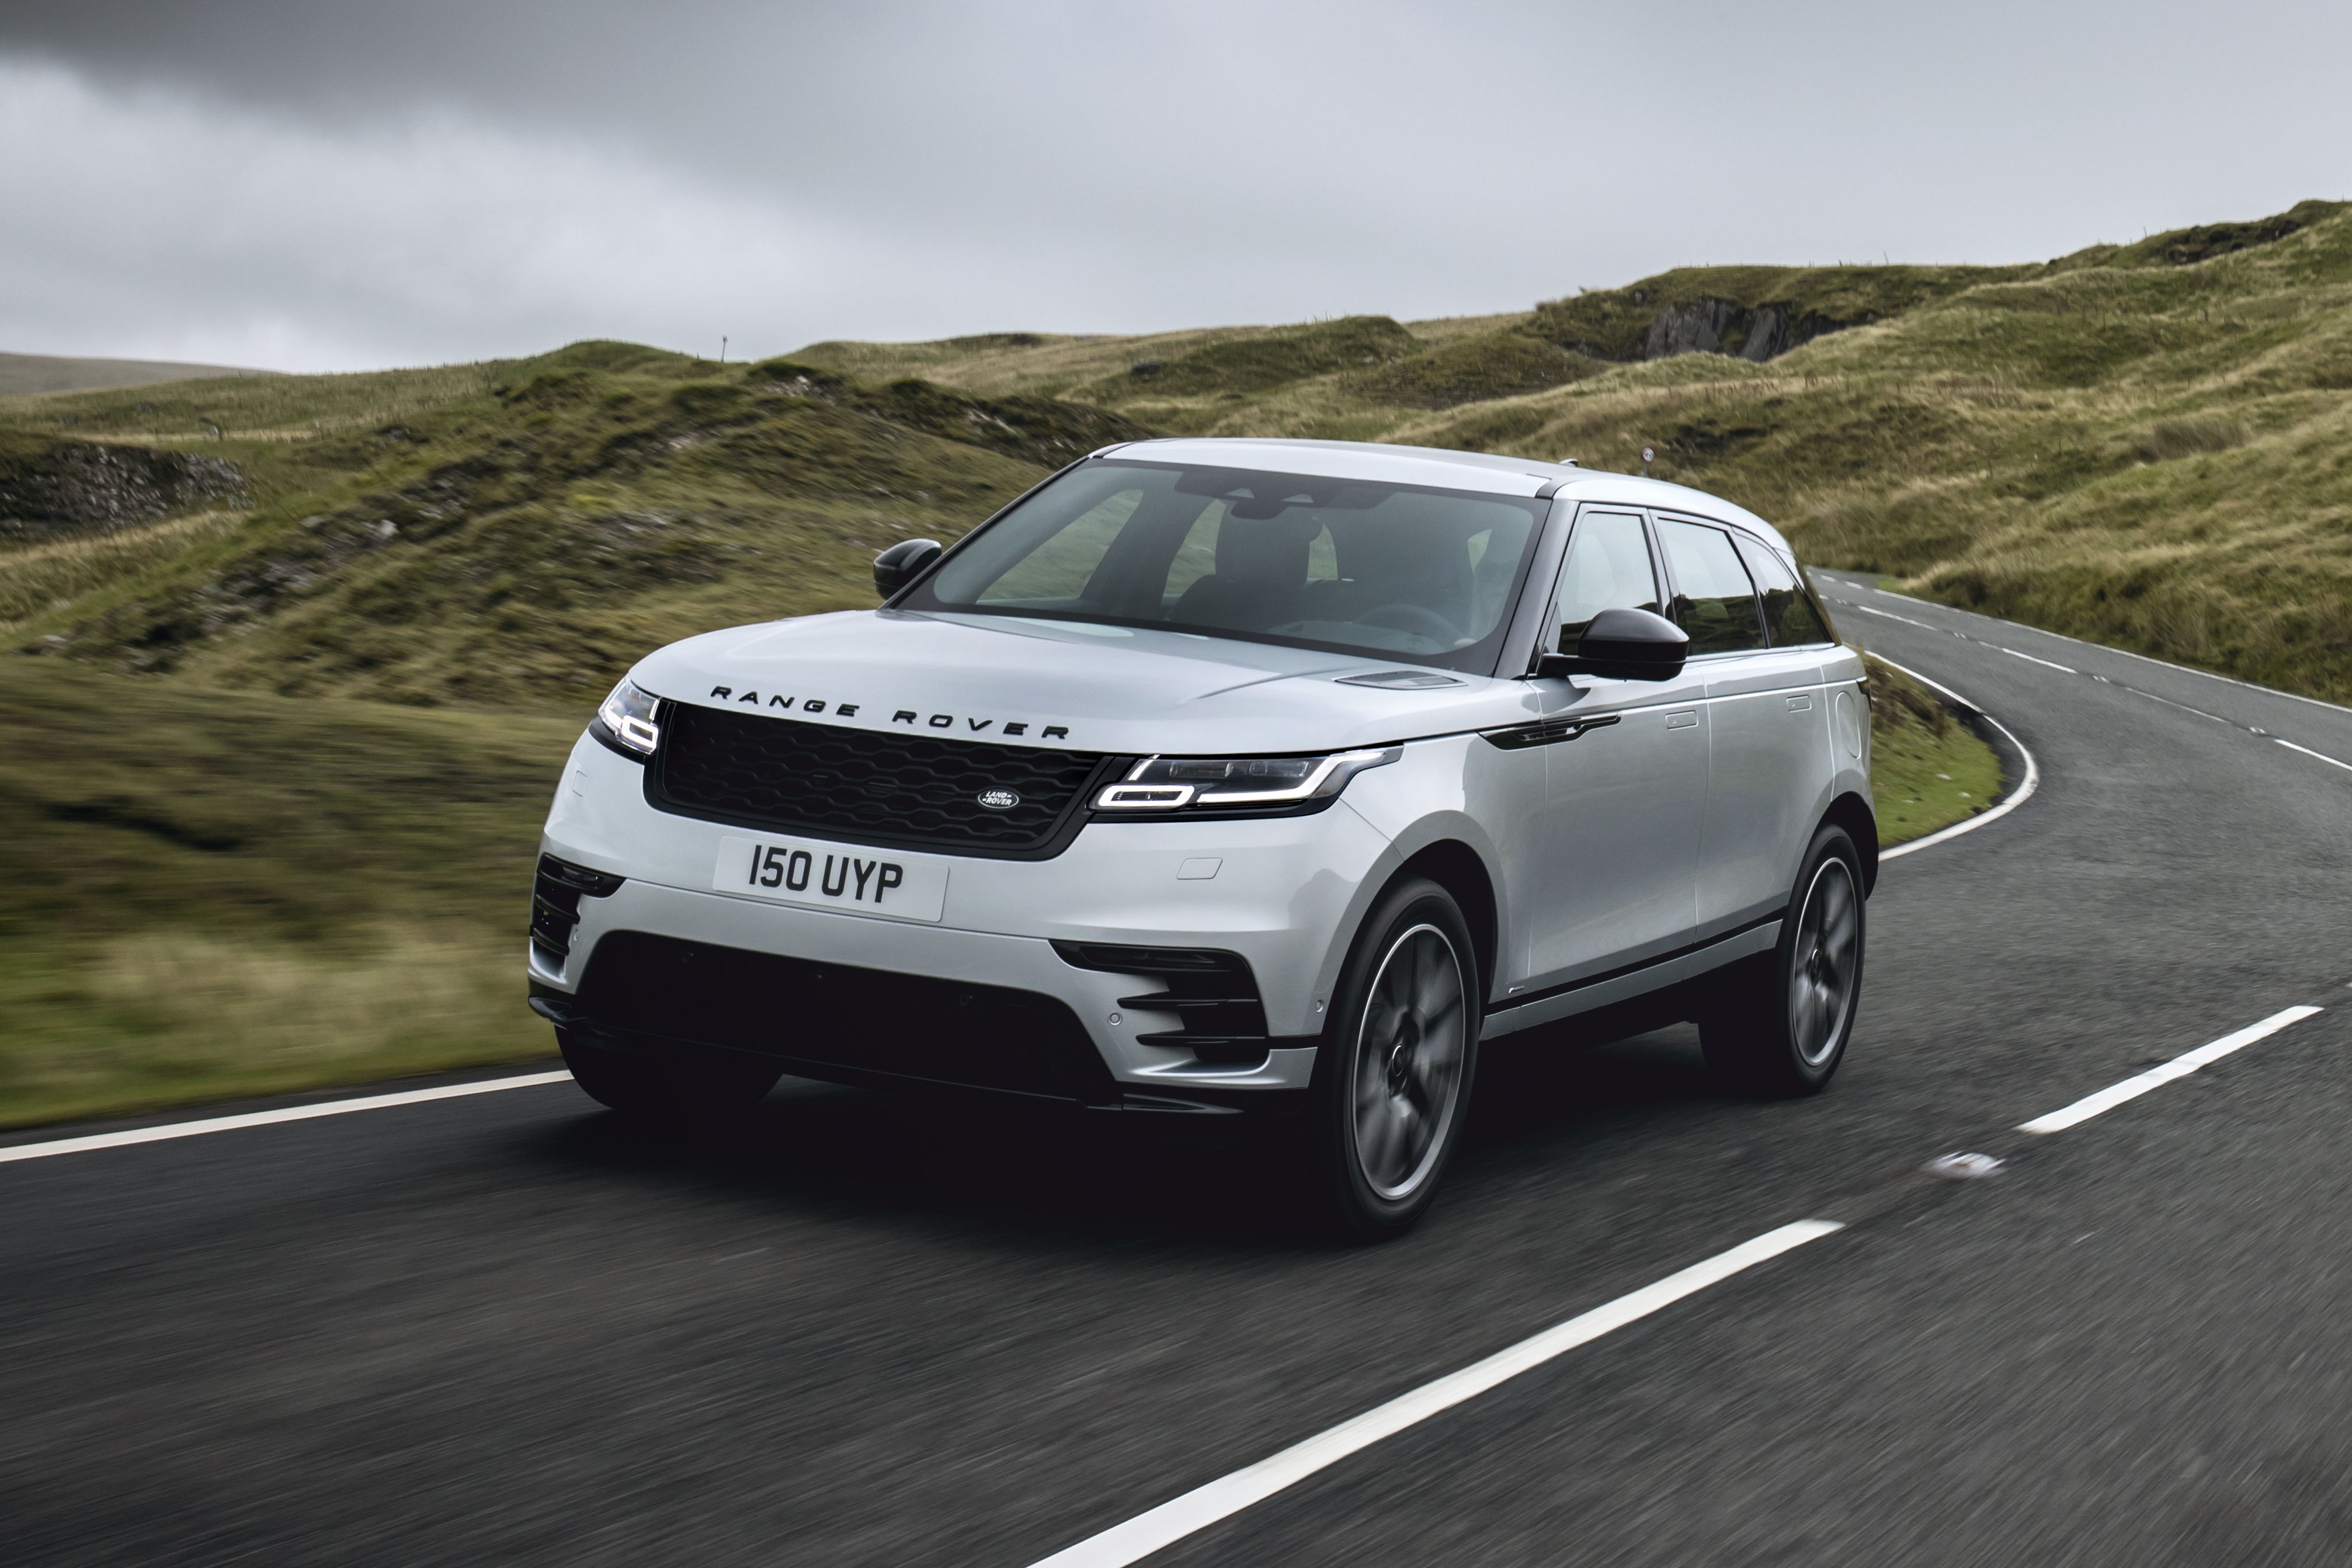 2022 Land Rover Range Rover Velar Review, Pricing, and Specs